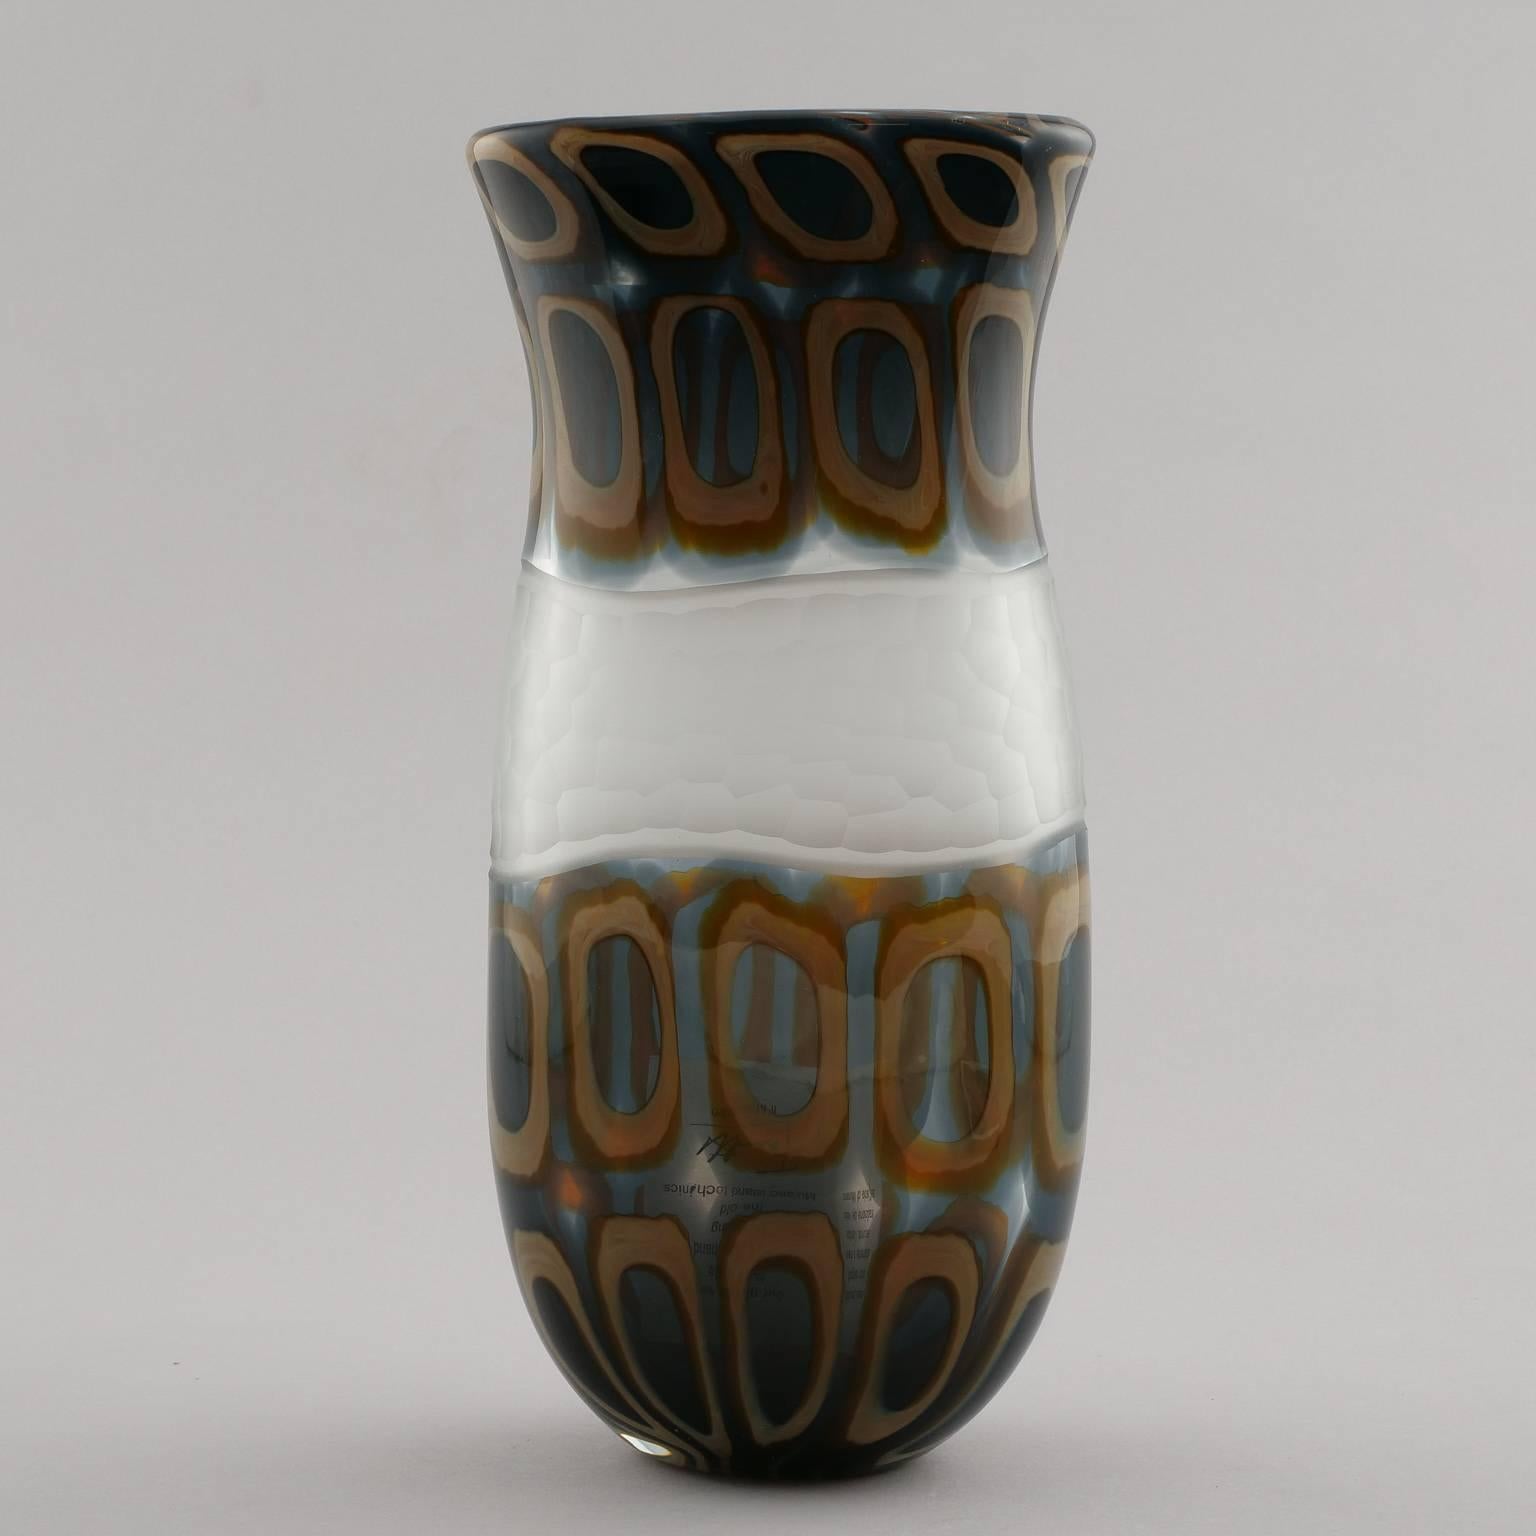 Stunning Murano glass vase by maker Formentello in deep shades of green with two rows at base and mouth of abstract, dark gold/brown circles separated by a wide, semi-opaque white center band. Signed by the maker with original card included.